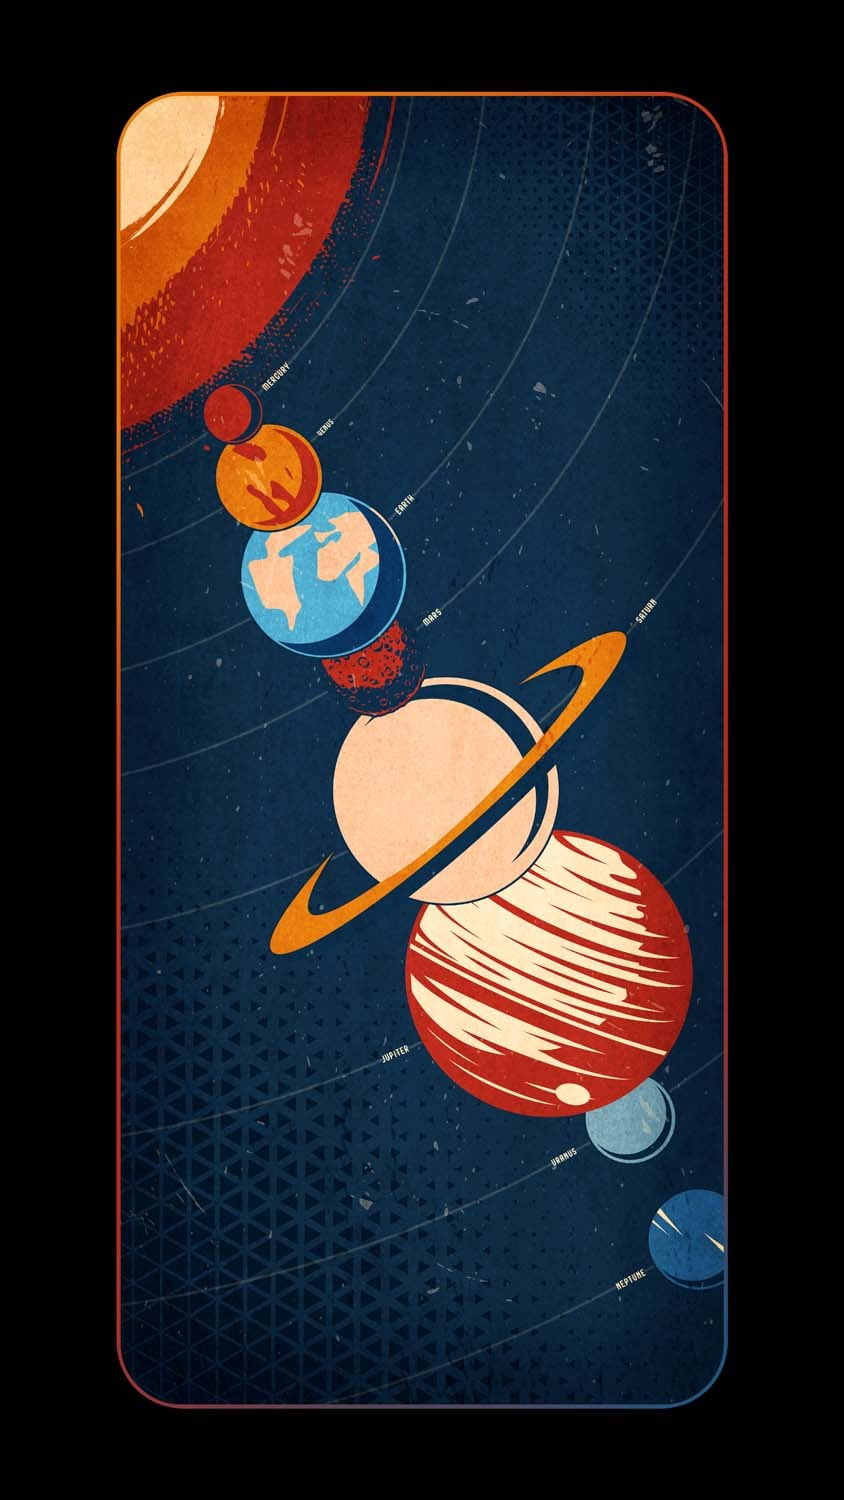 Vintage Space Images  Free Public Domain Paintings Graphics   Illustrations  rawpixel